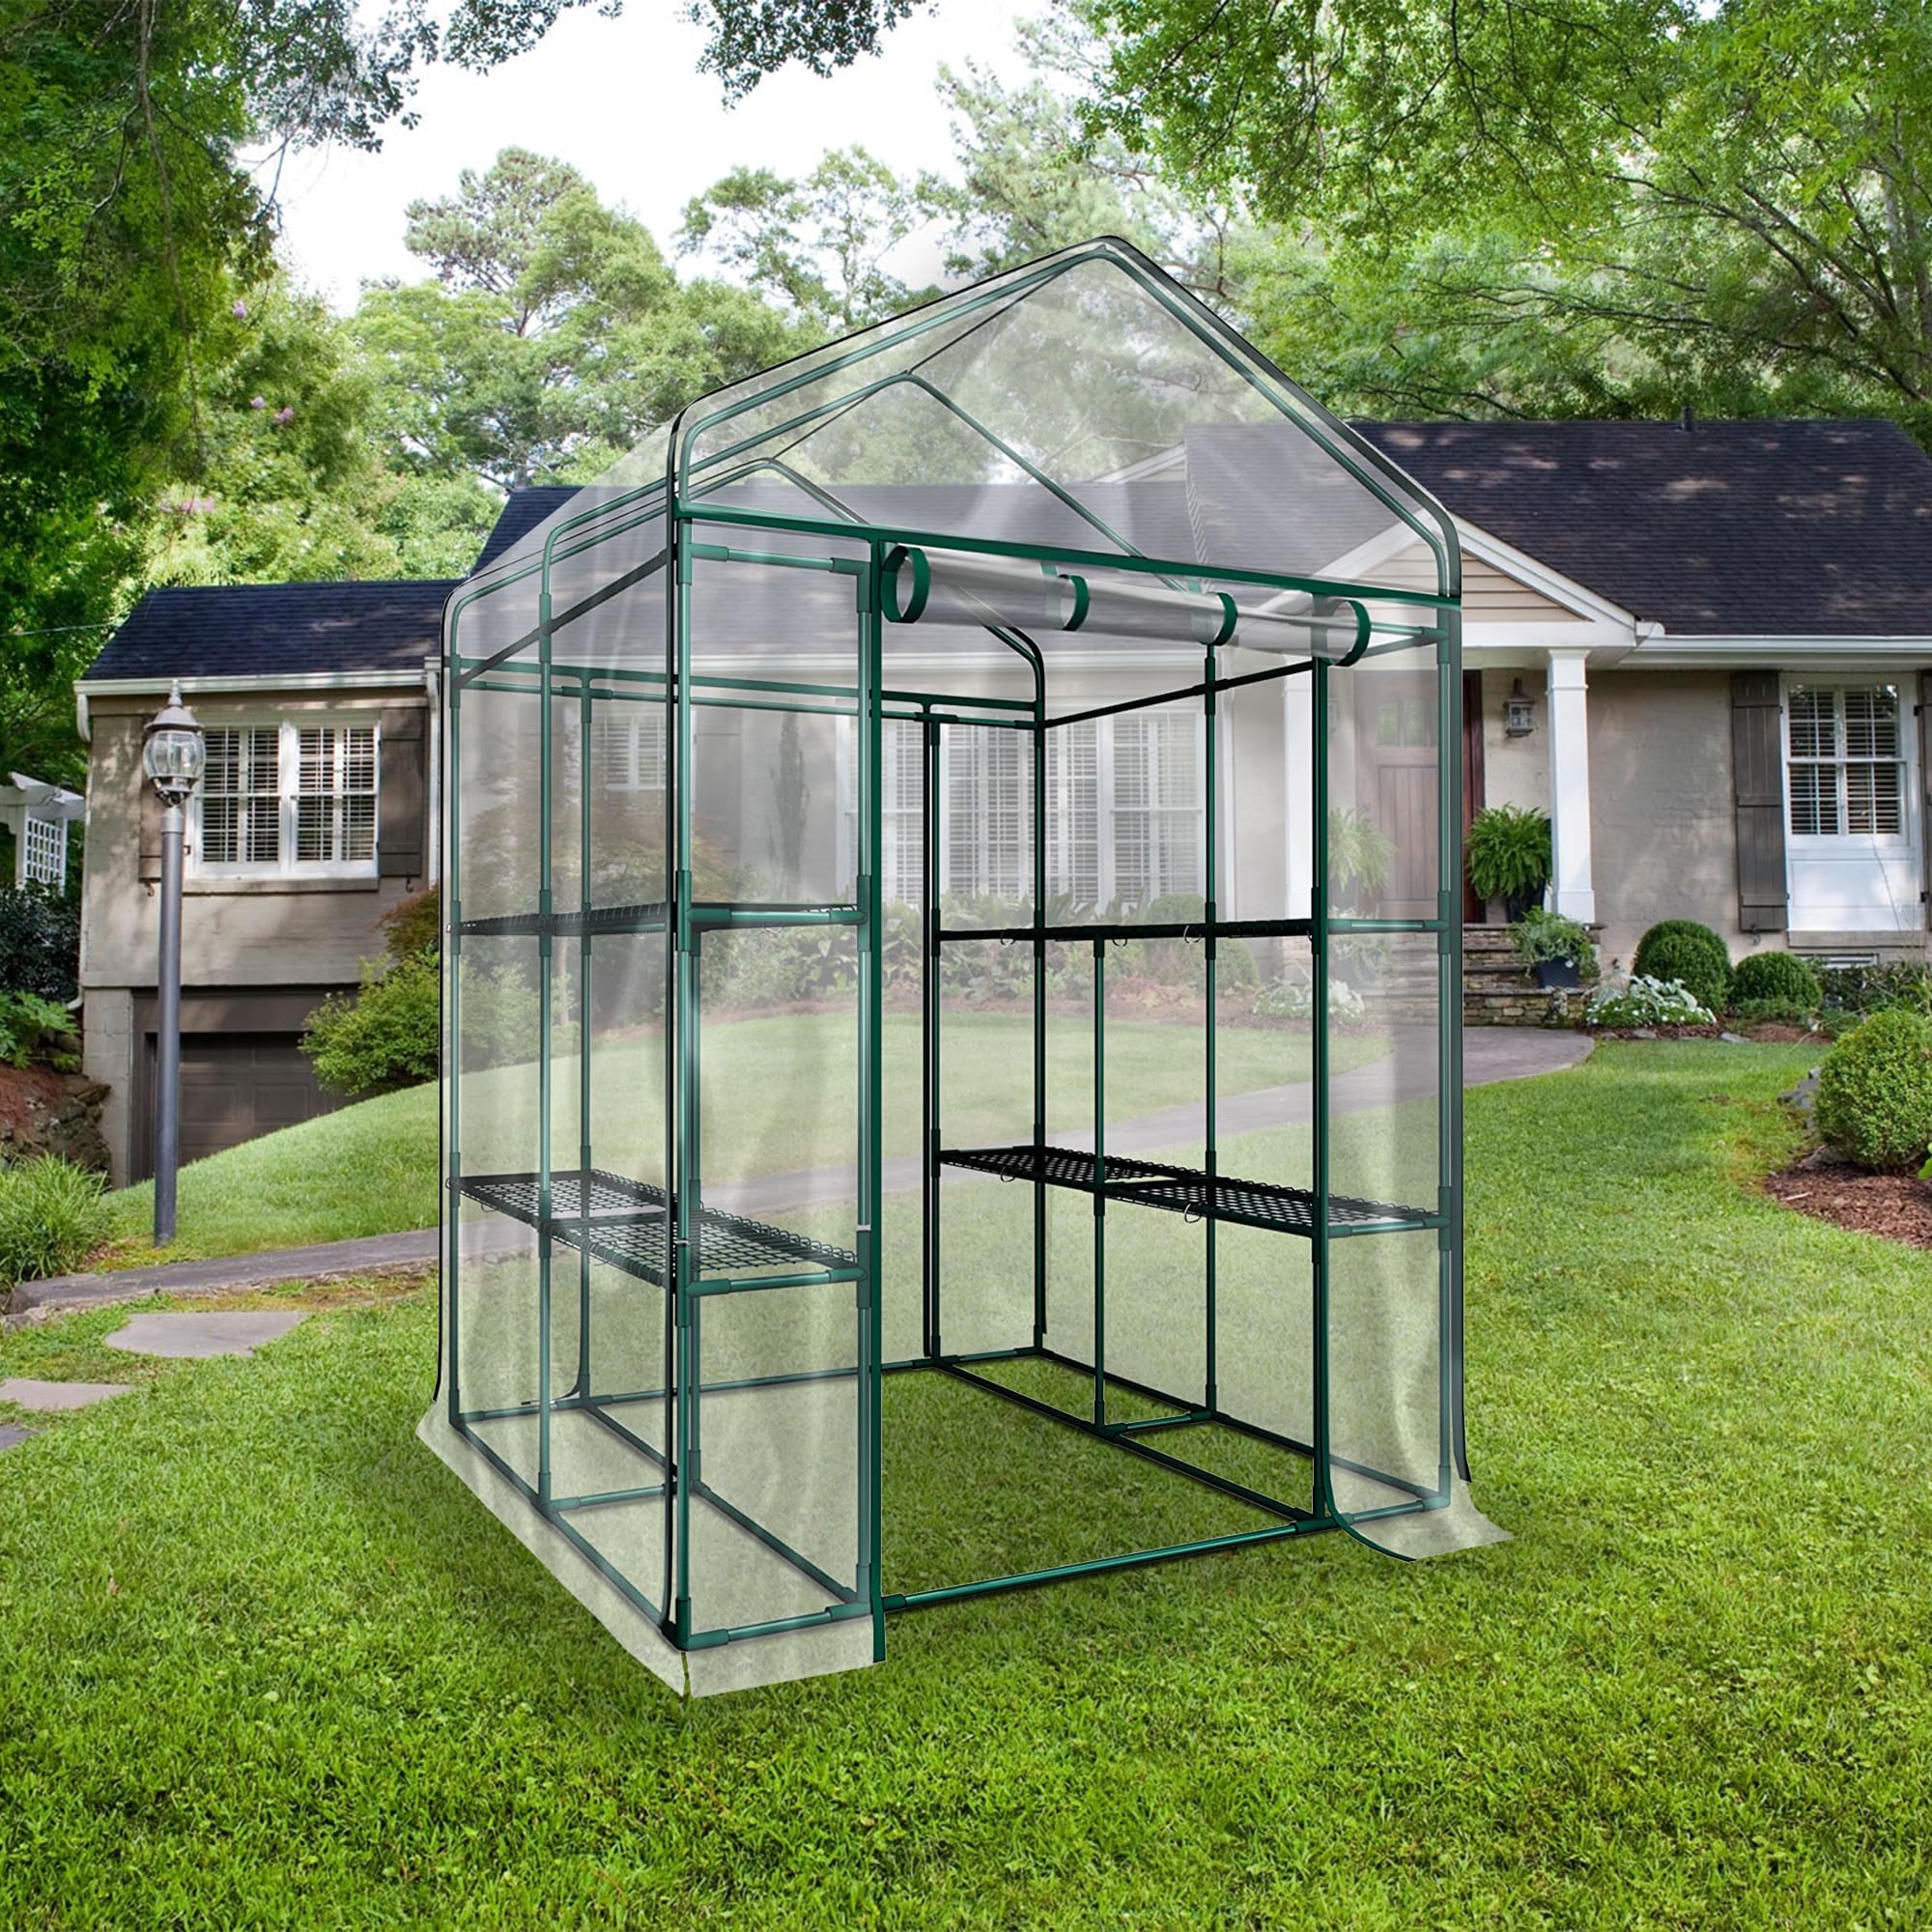 Walk Greenhouse Garden Grow House Reinforced Cover 8 Shelves Extra Large 6ft 